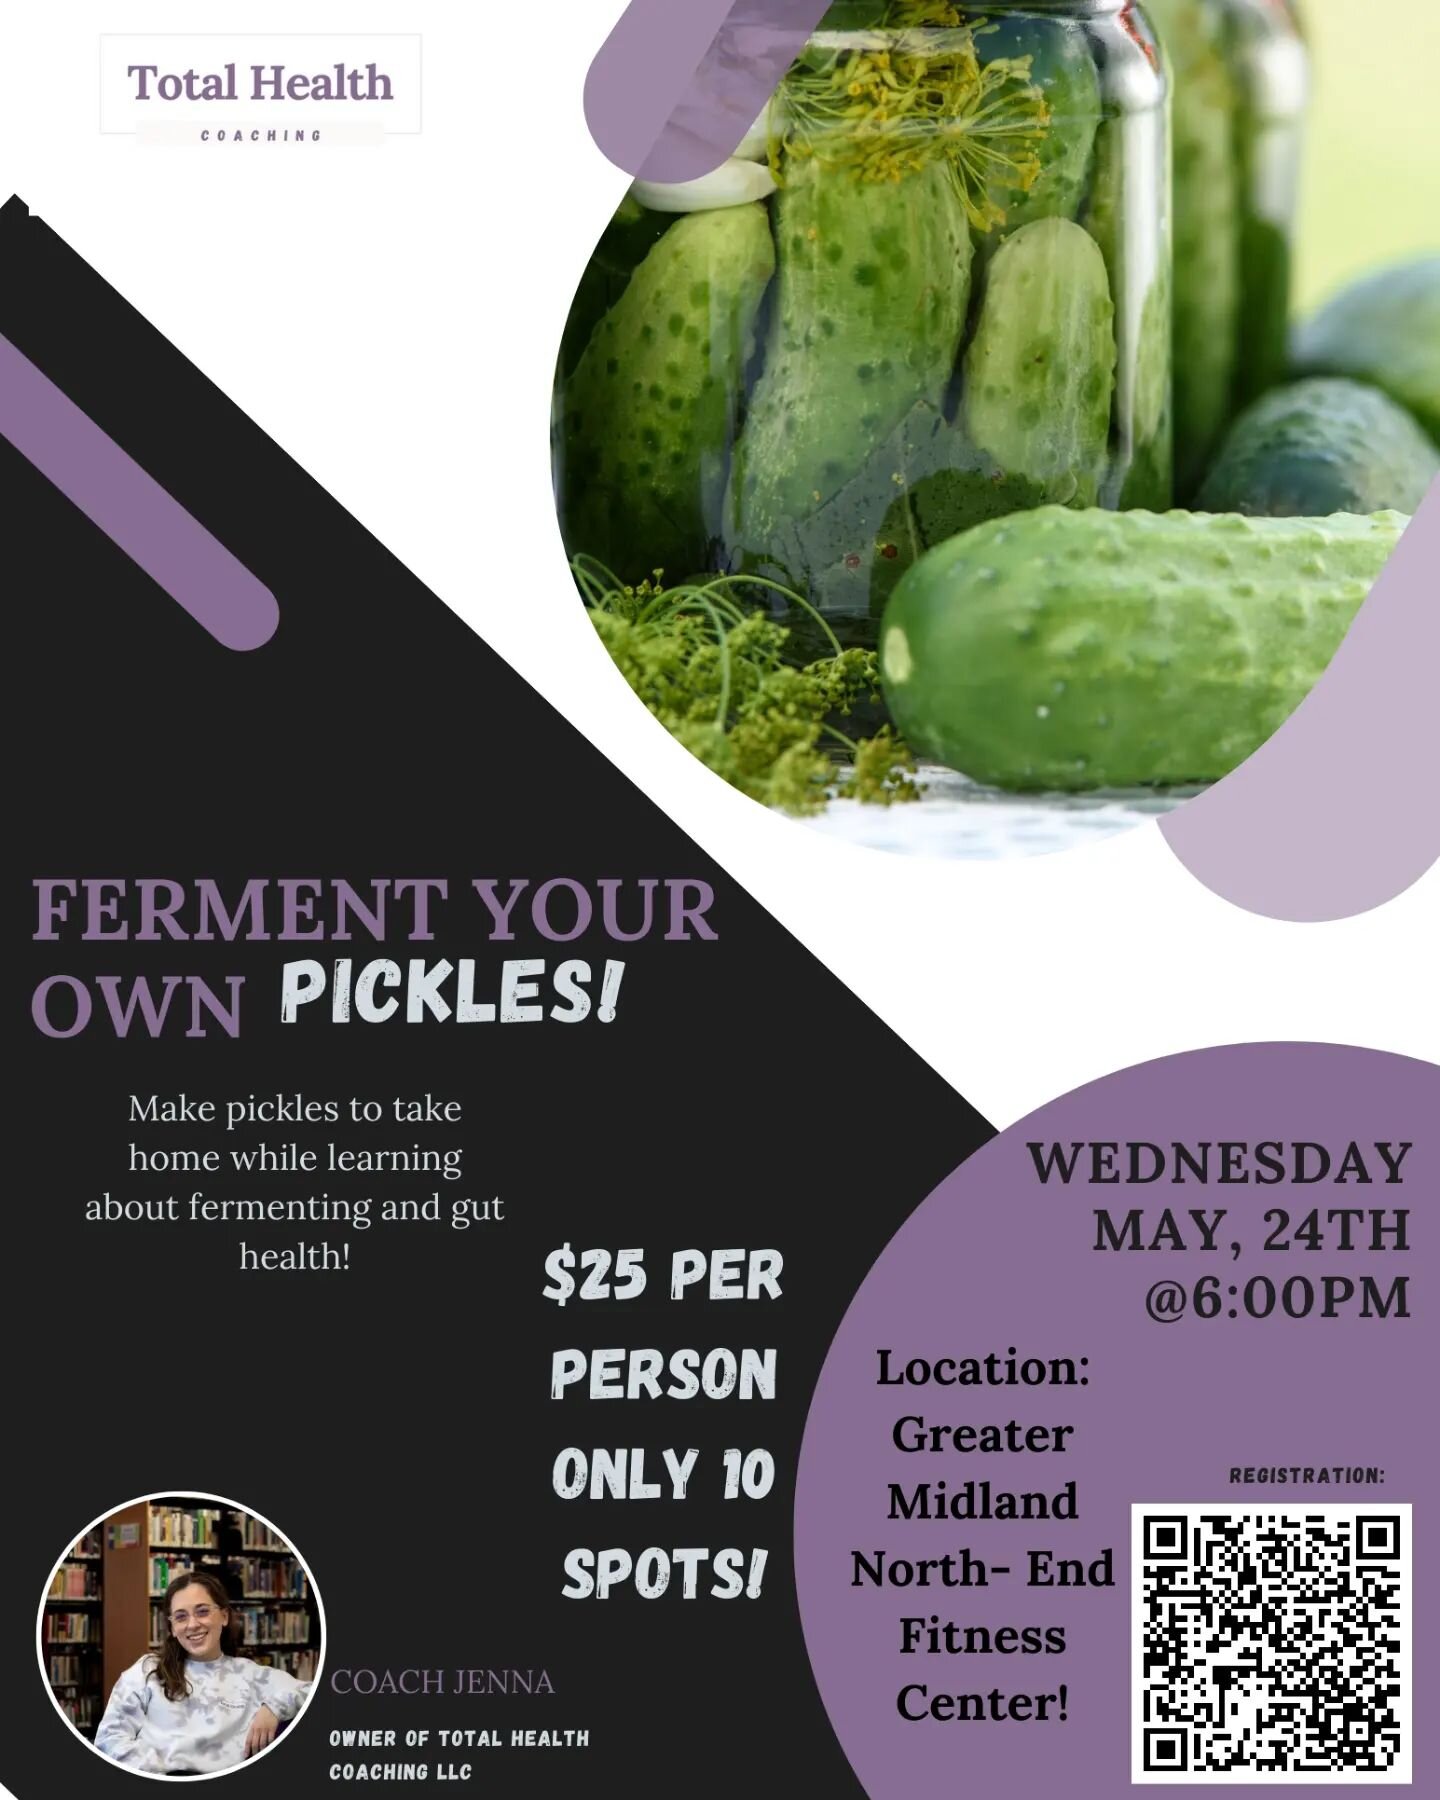 Join me for beginner pickle fermenting!

On Wednesday, May 24th, I will be hosting an in person class on fermenting!

We will learn the basics. Start our own pickle ferments to take home and learn about how important fermenting is to gut health.

Com